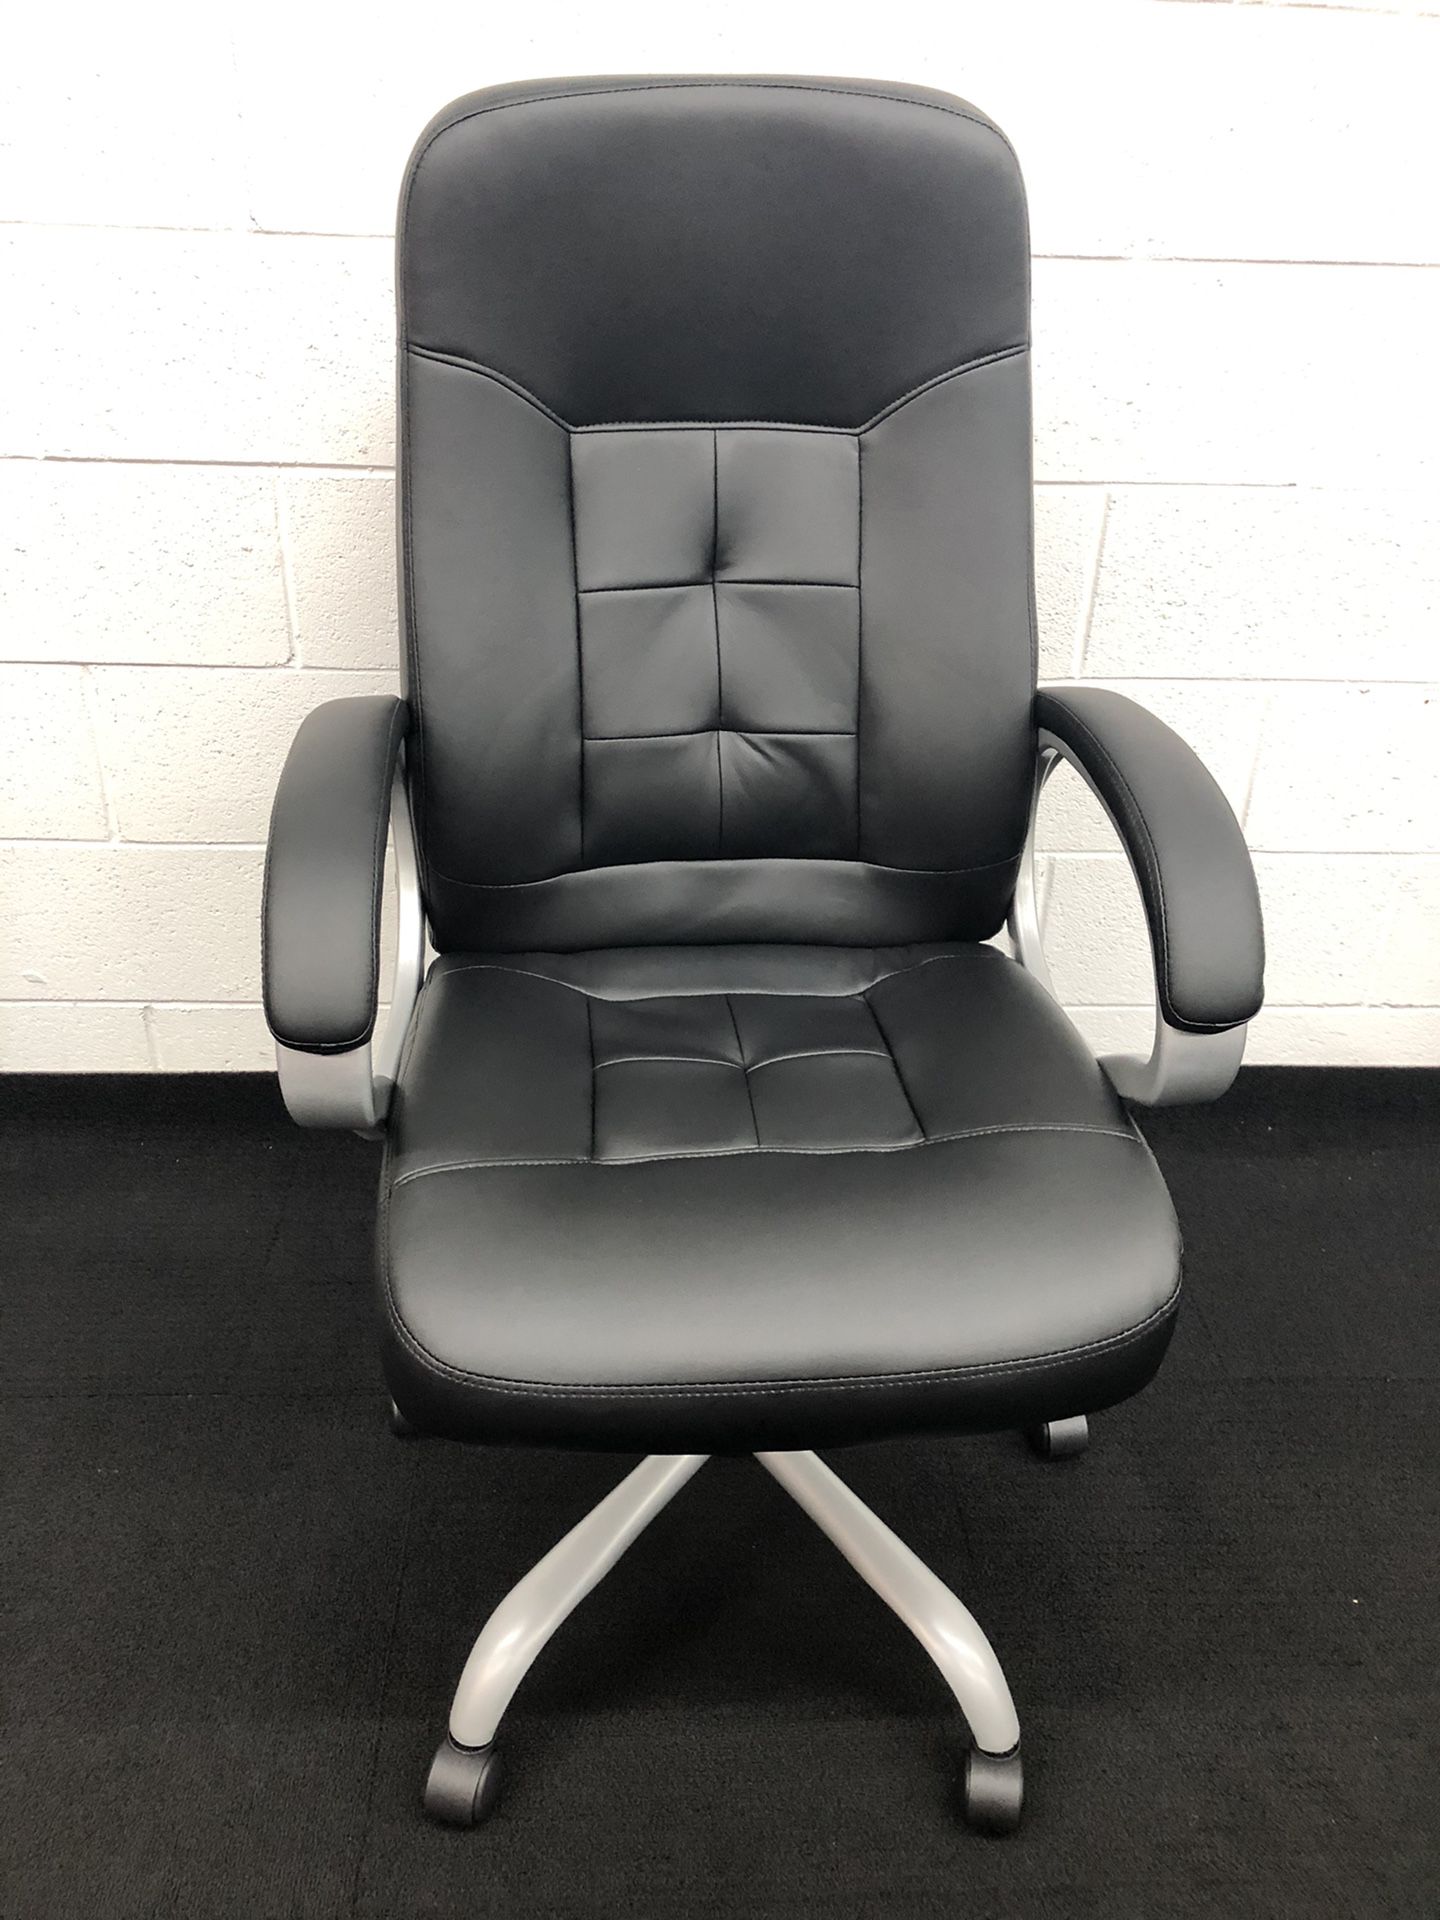 BRAND NEW BLACK ADJUSTABLE EXECUTIVE OFFICE CHAIR